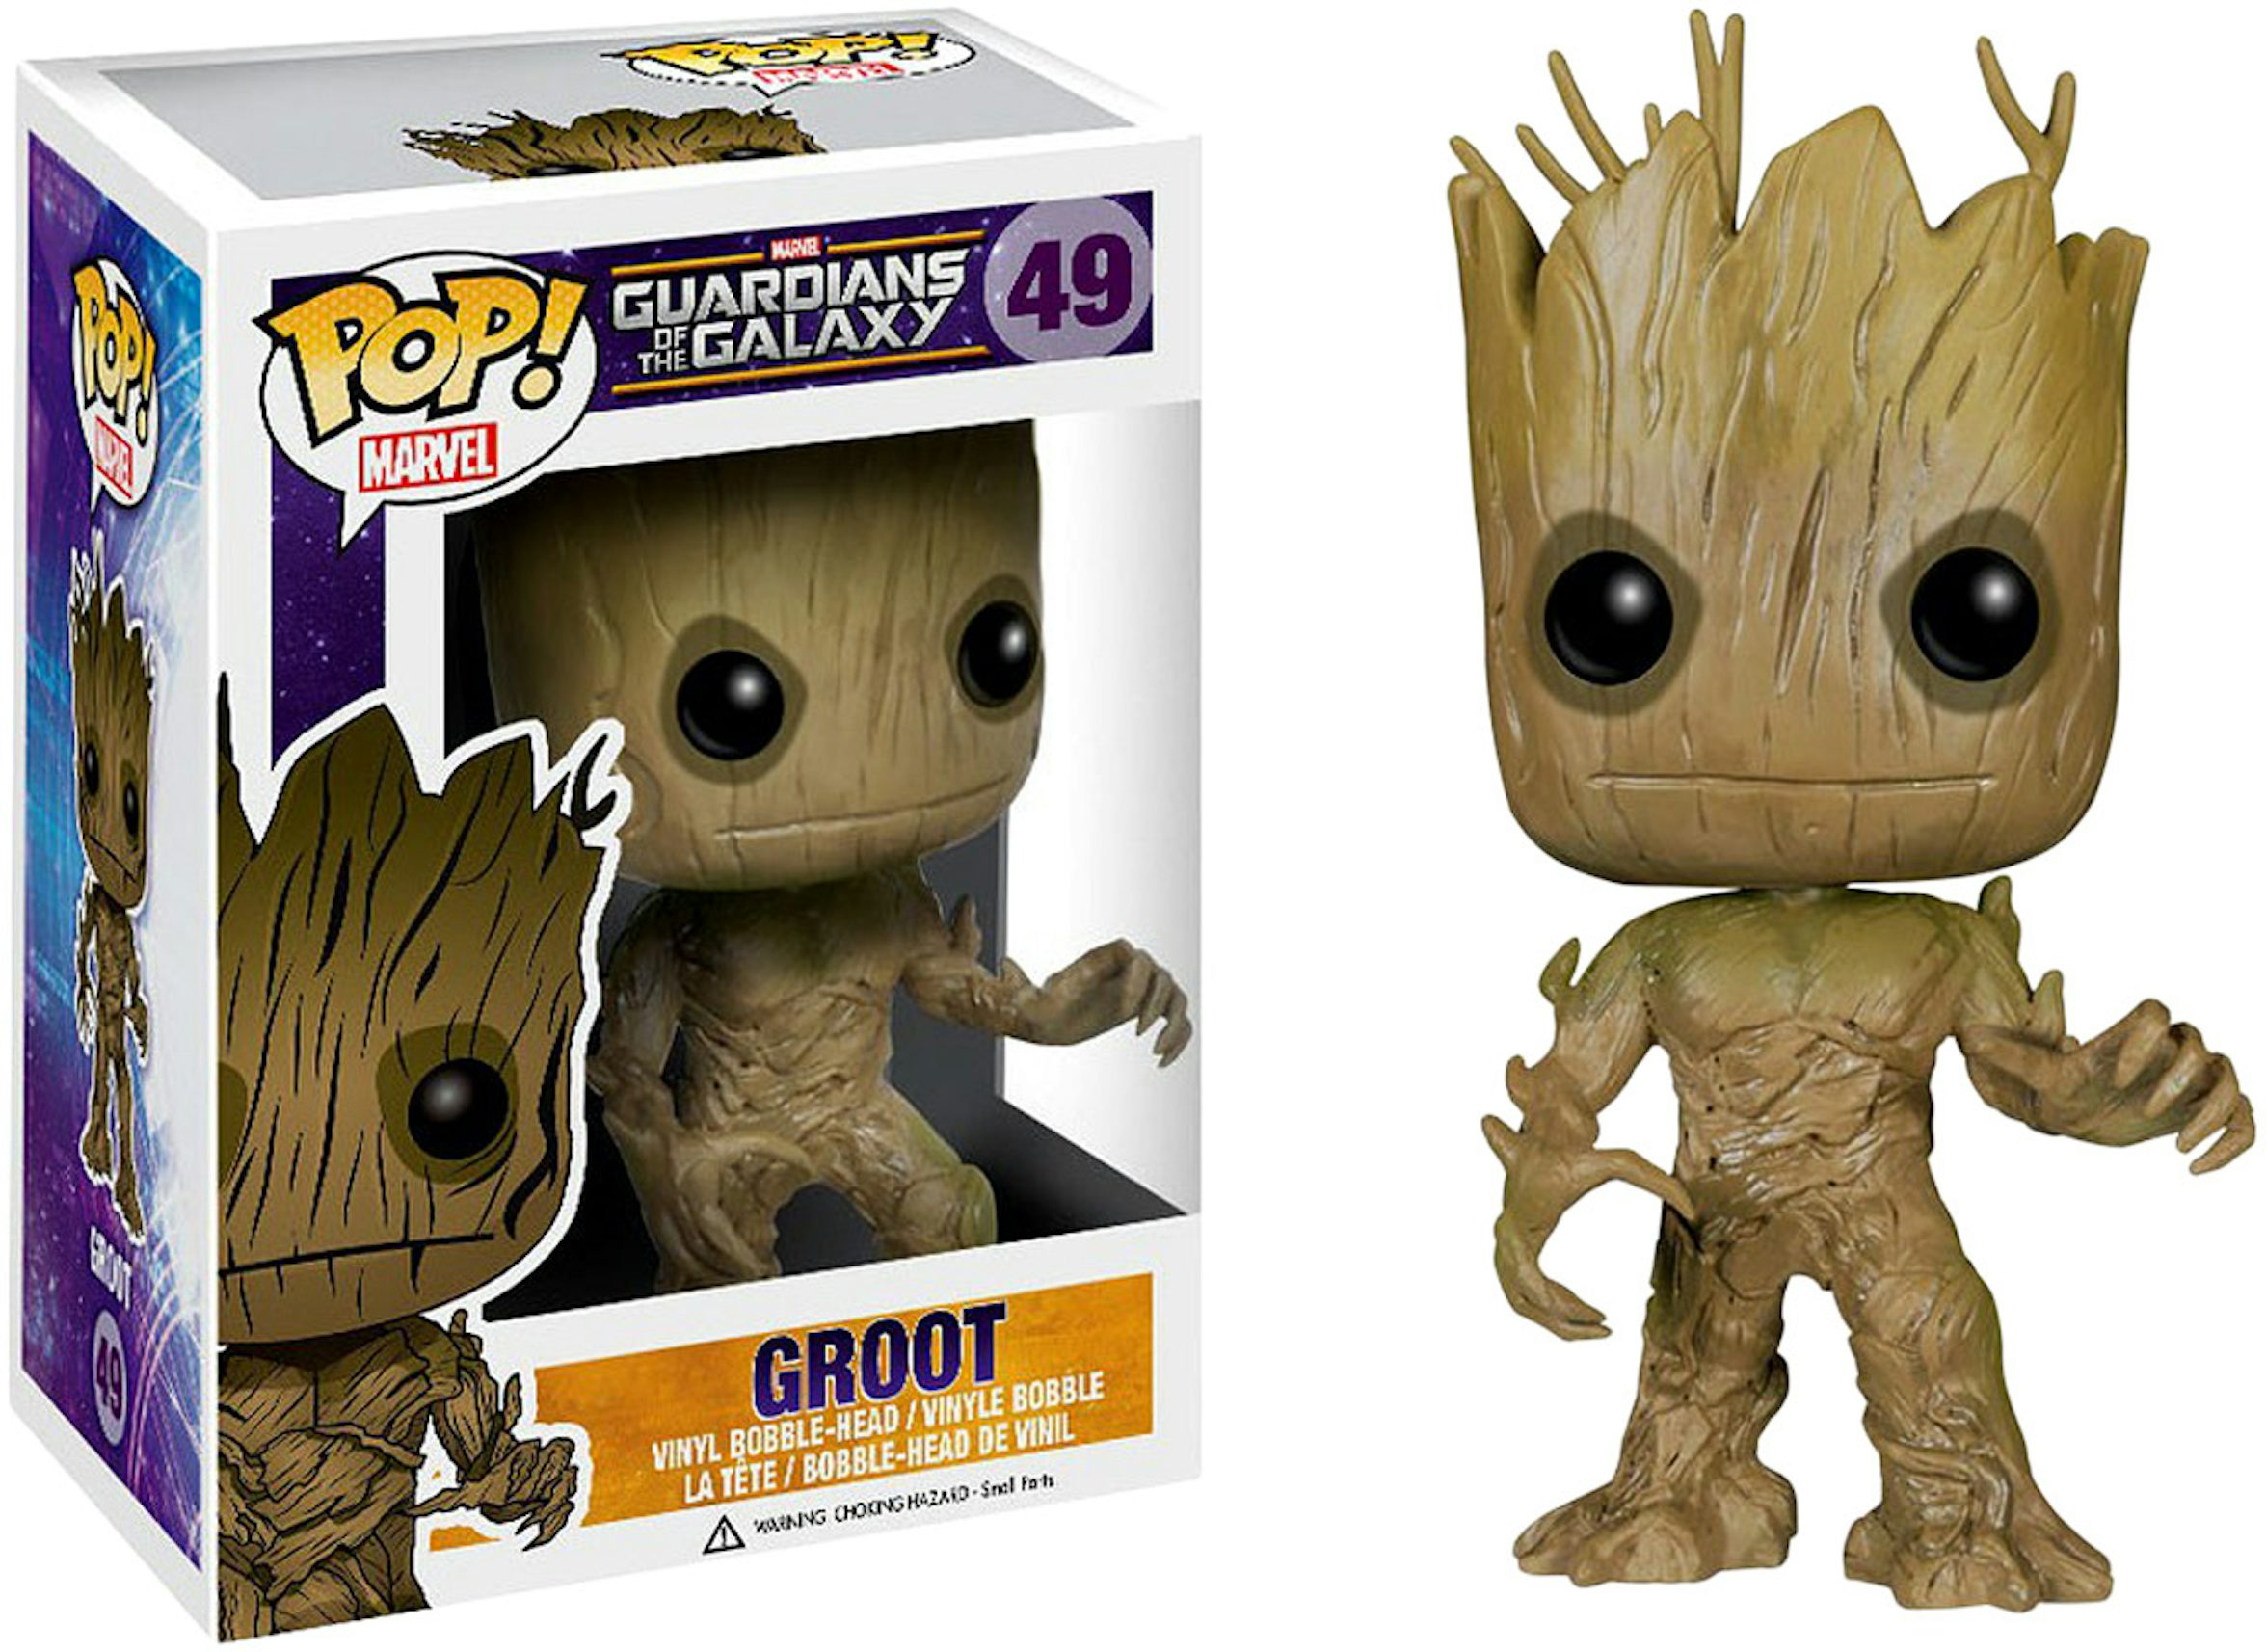 Funko Pop! Marvel Guardian of the Galaxy Vol. 2 Rocket with Groot Collector  Corps Exclusive Bobble-Head #211